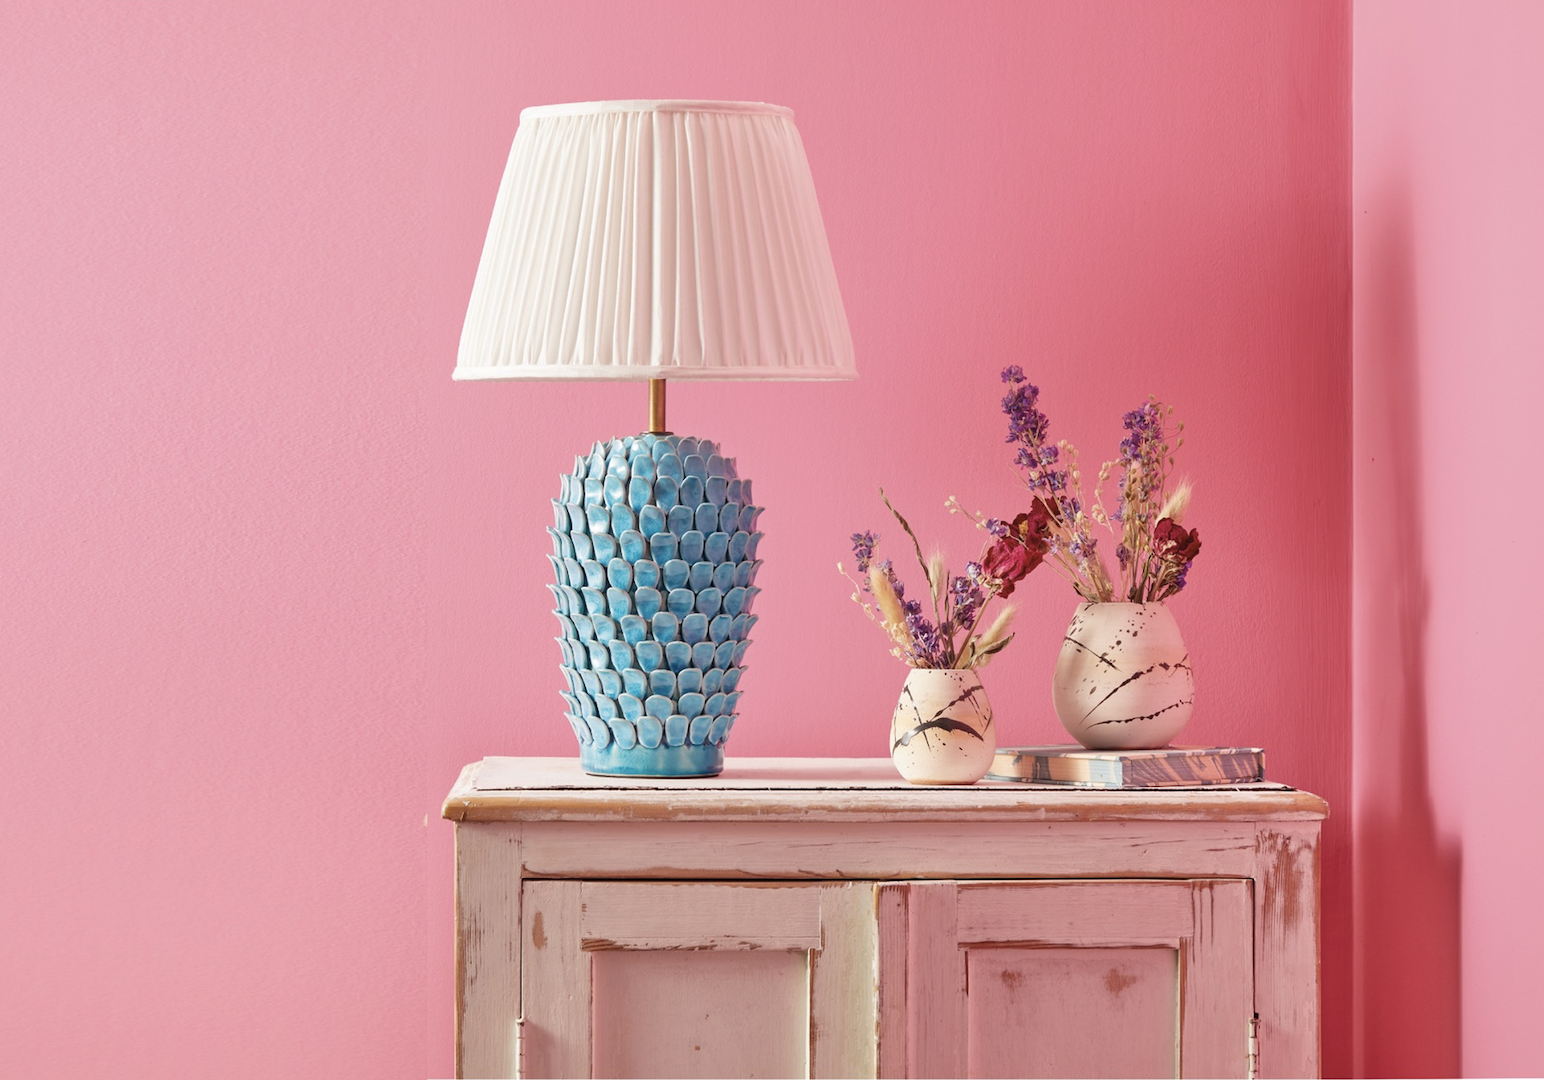 Elevate your home decor and make a lasting impression with the subtle sophistication of table lamps.